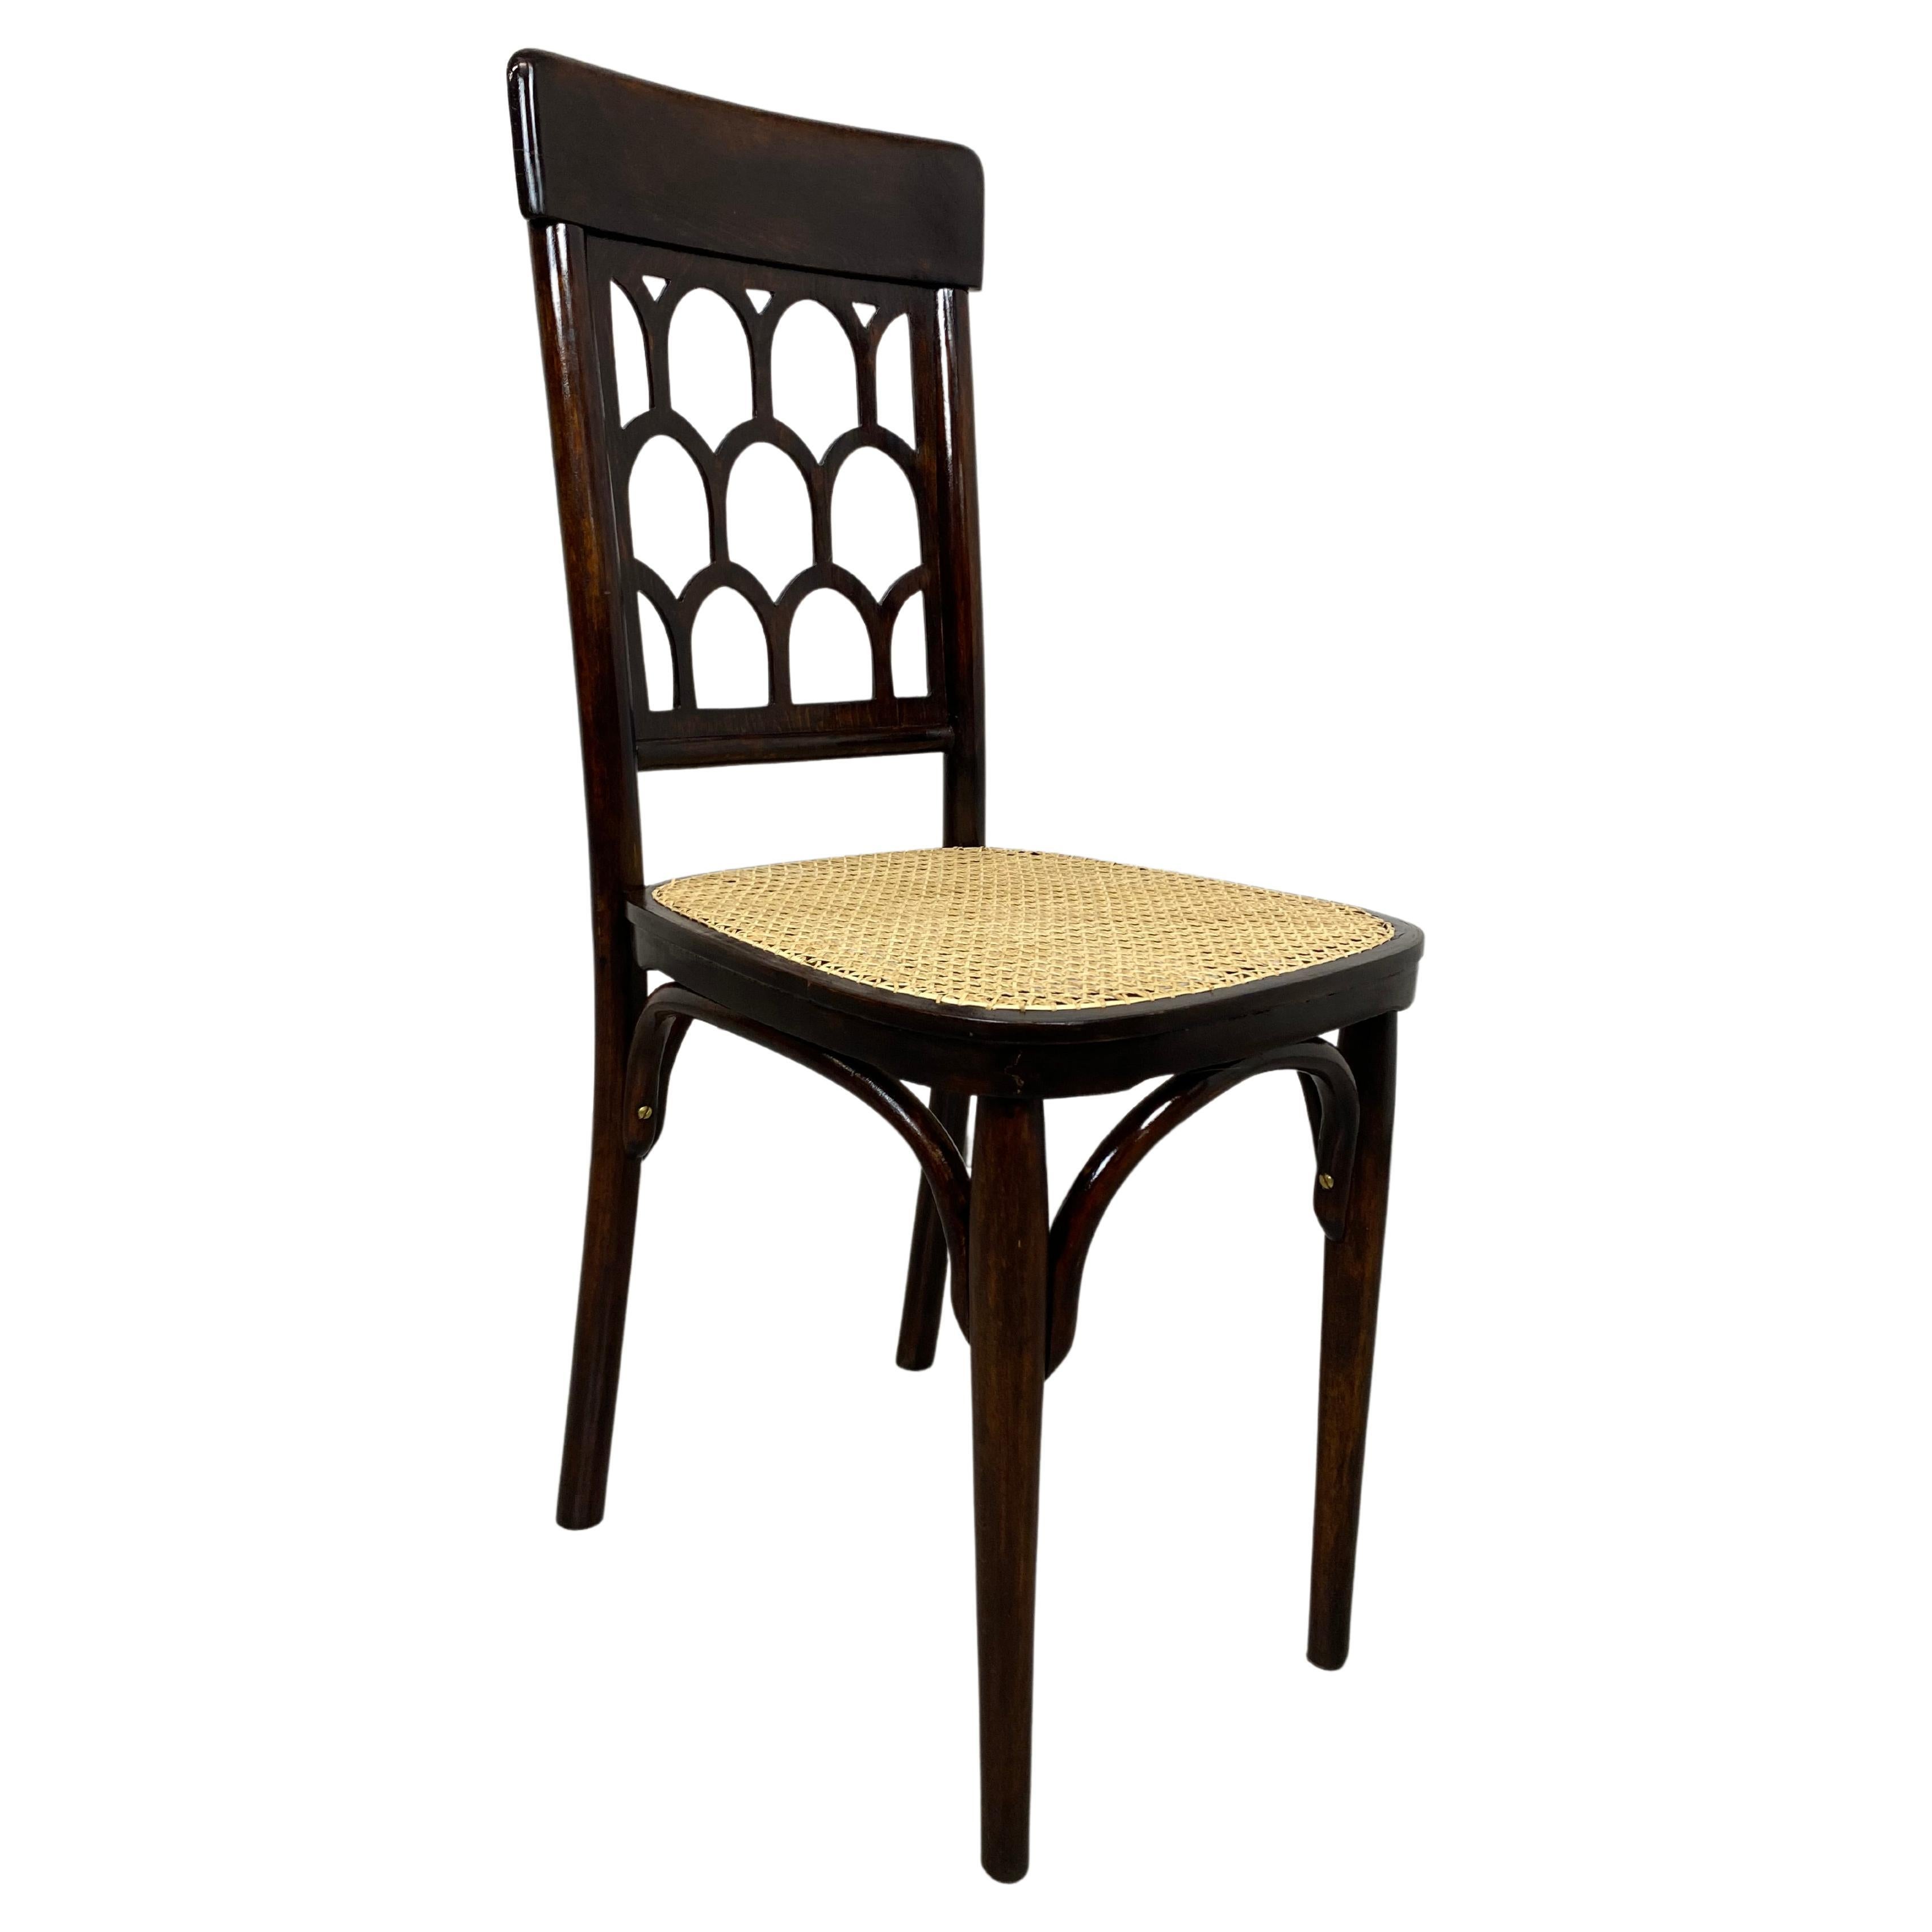 Secession beehive chair by Koloman Moser for J&J Kohn For Sale